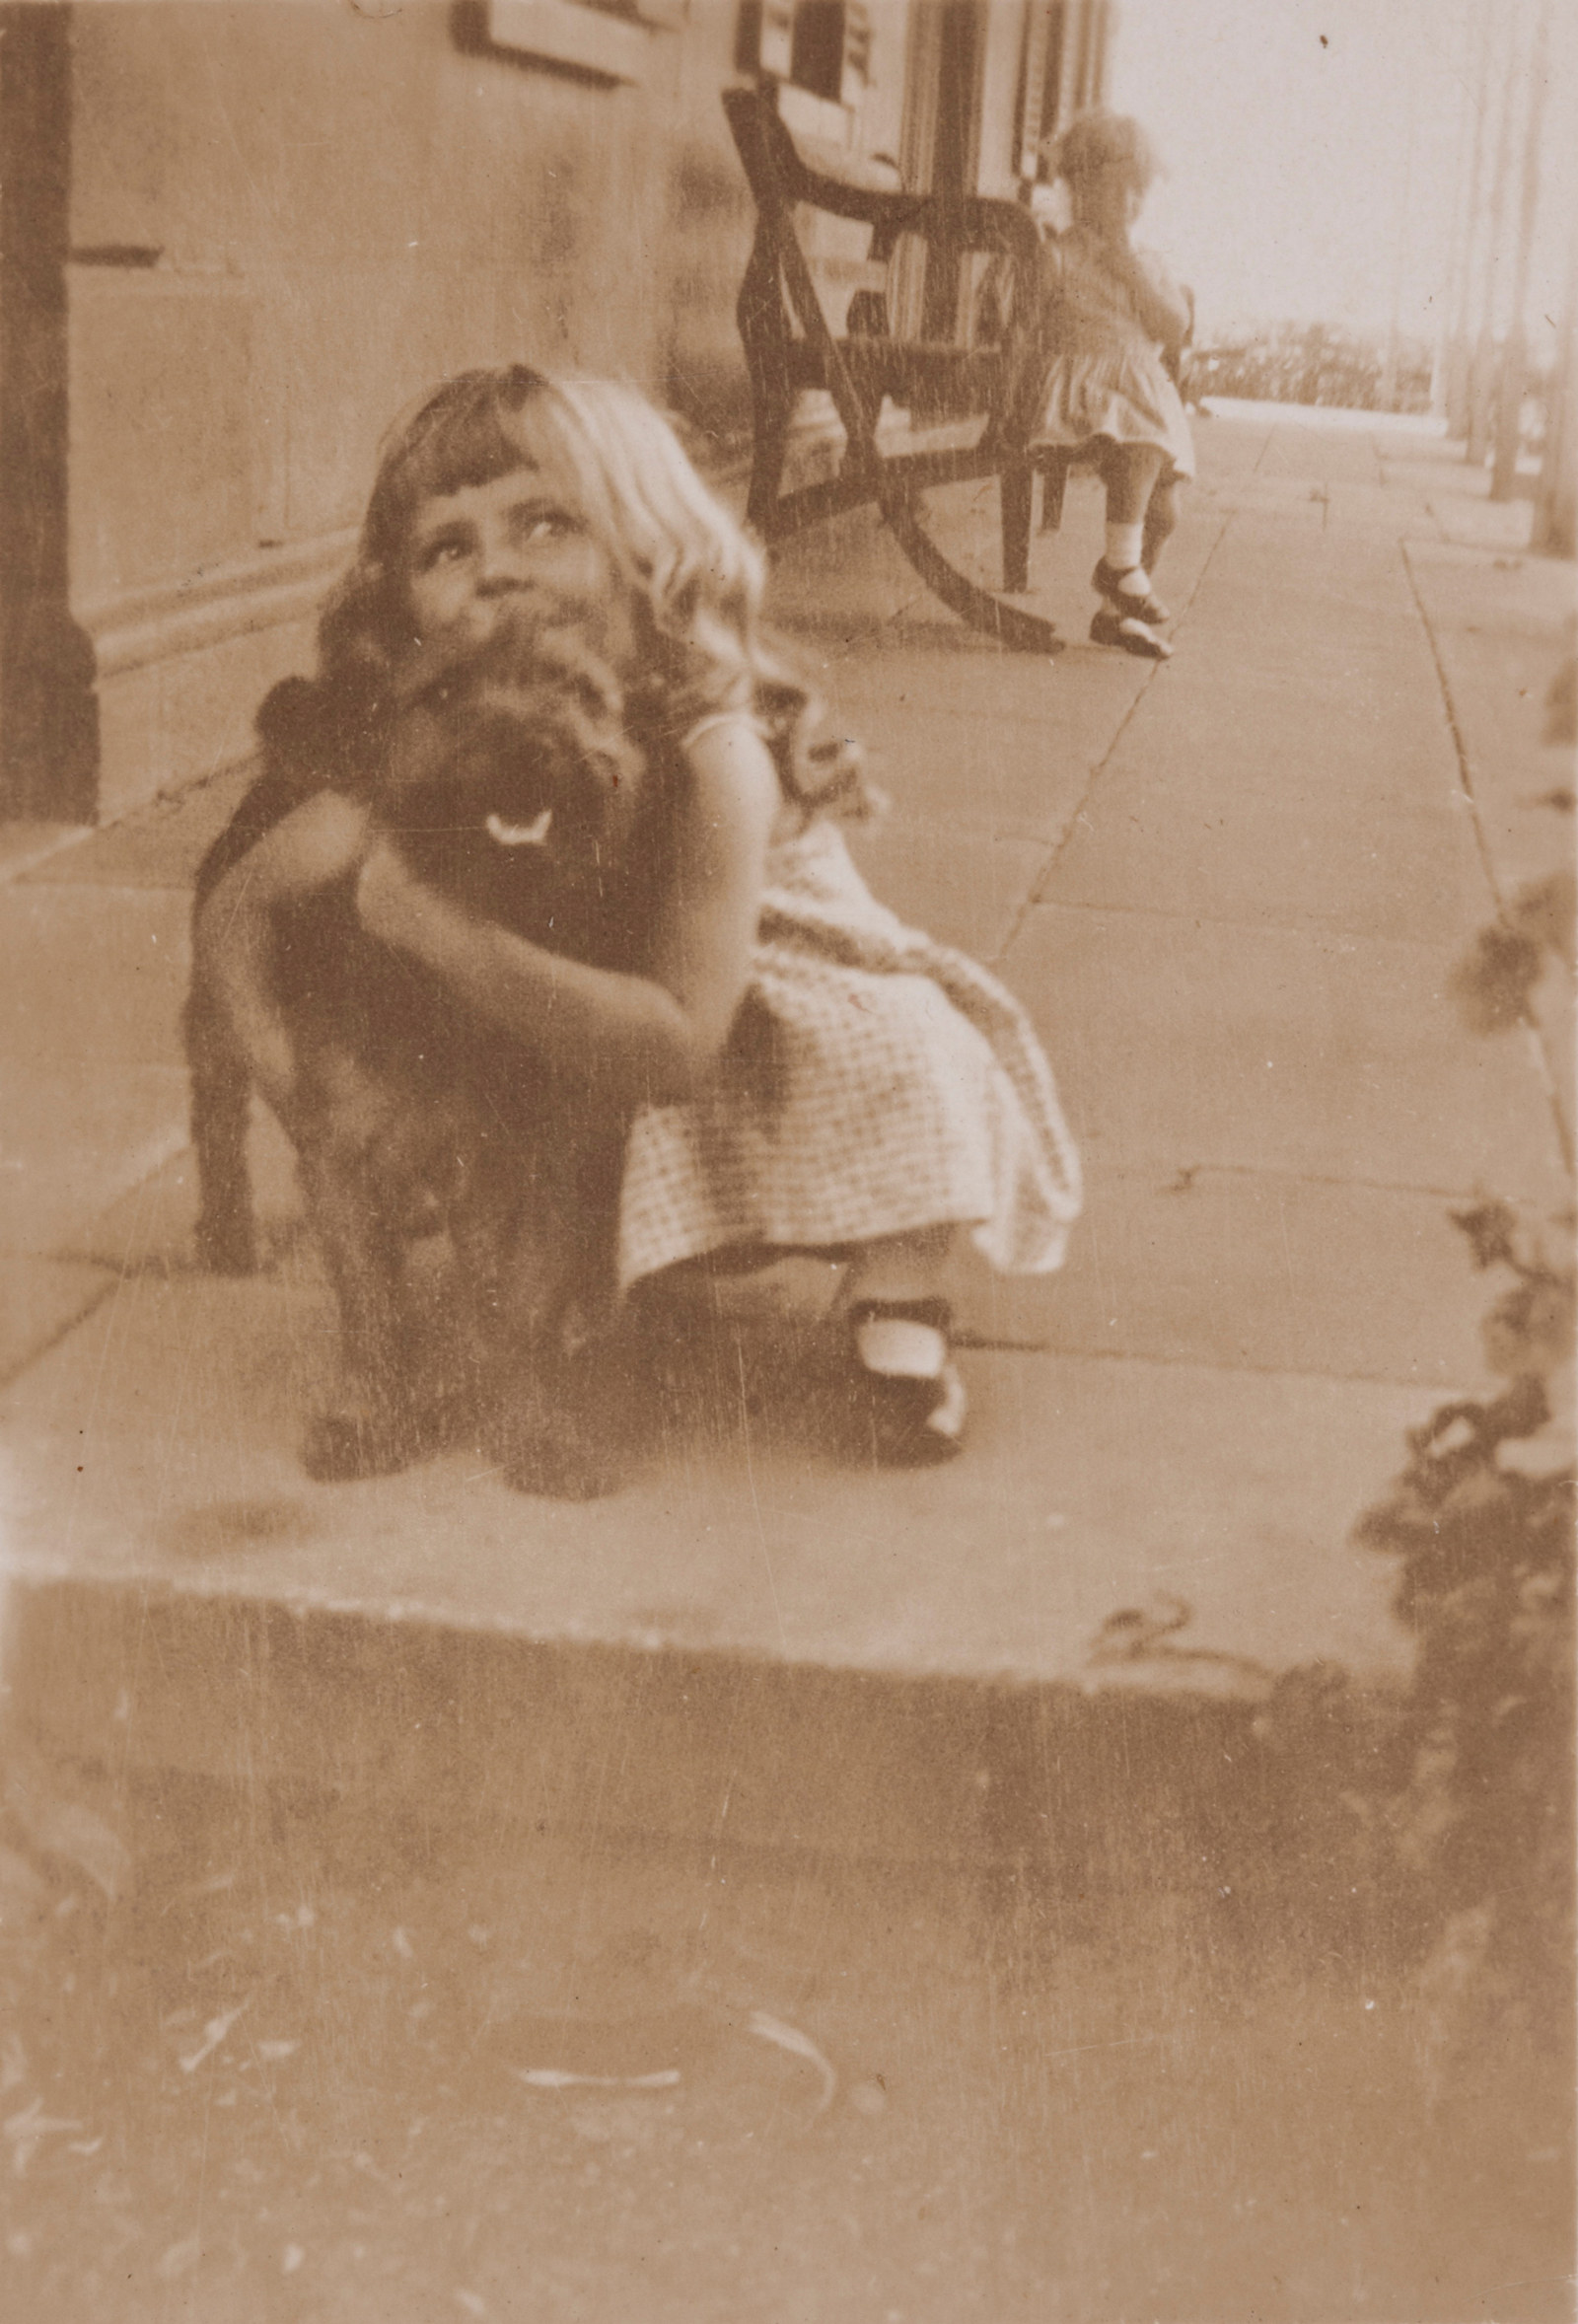 Sepia toned photo of young girl hugging dog on stone step with another young girl in background seated.